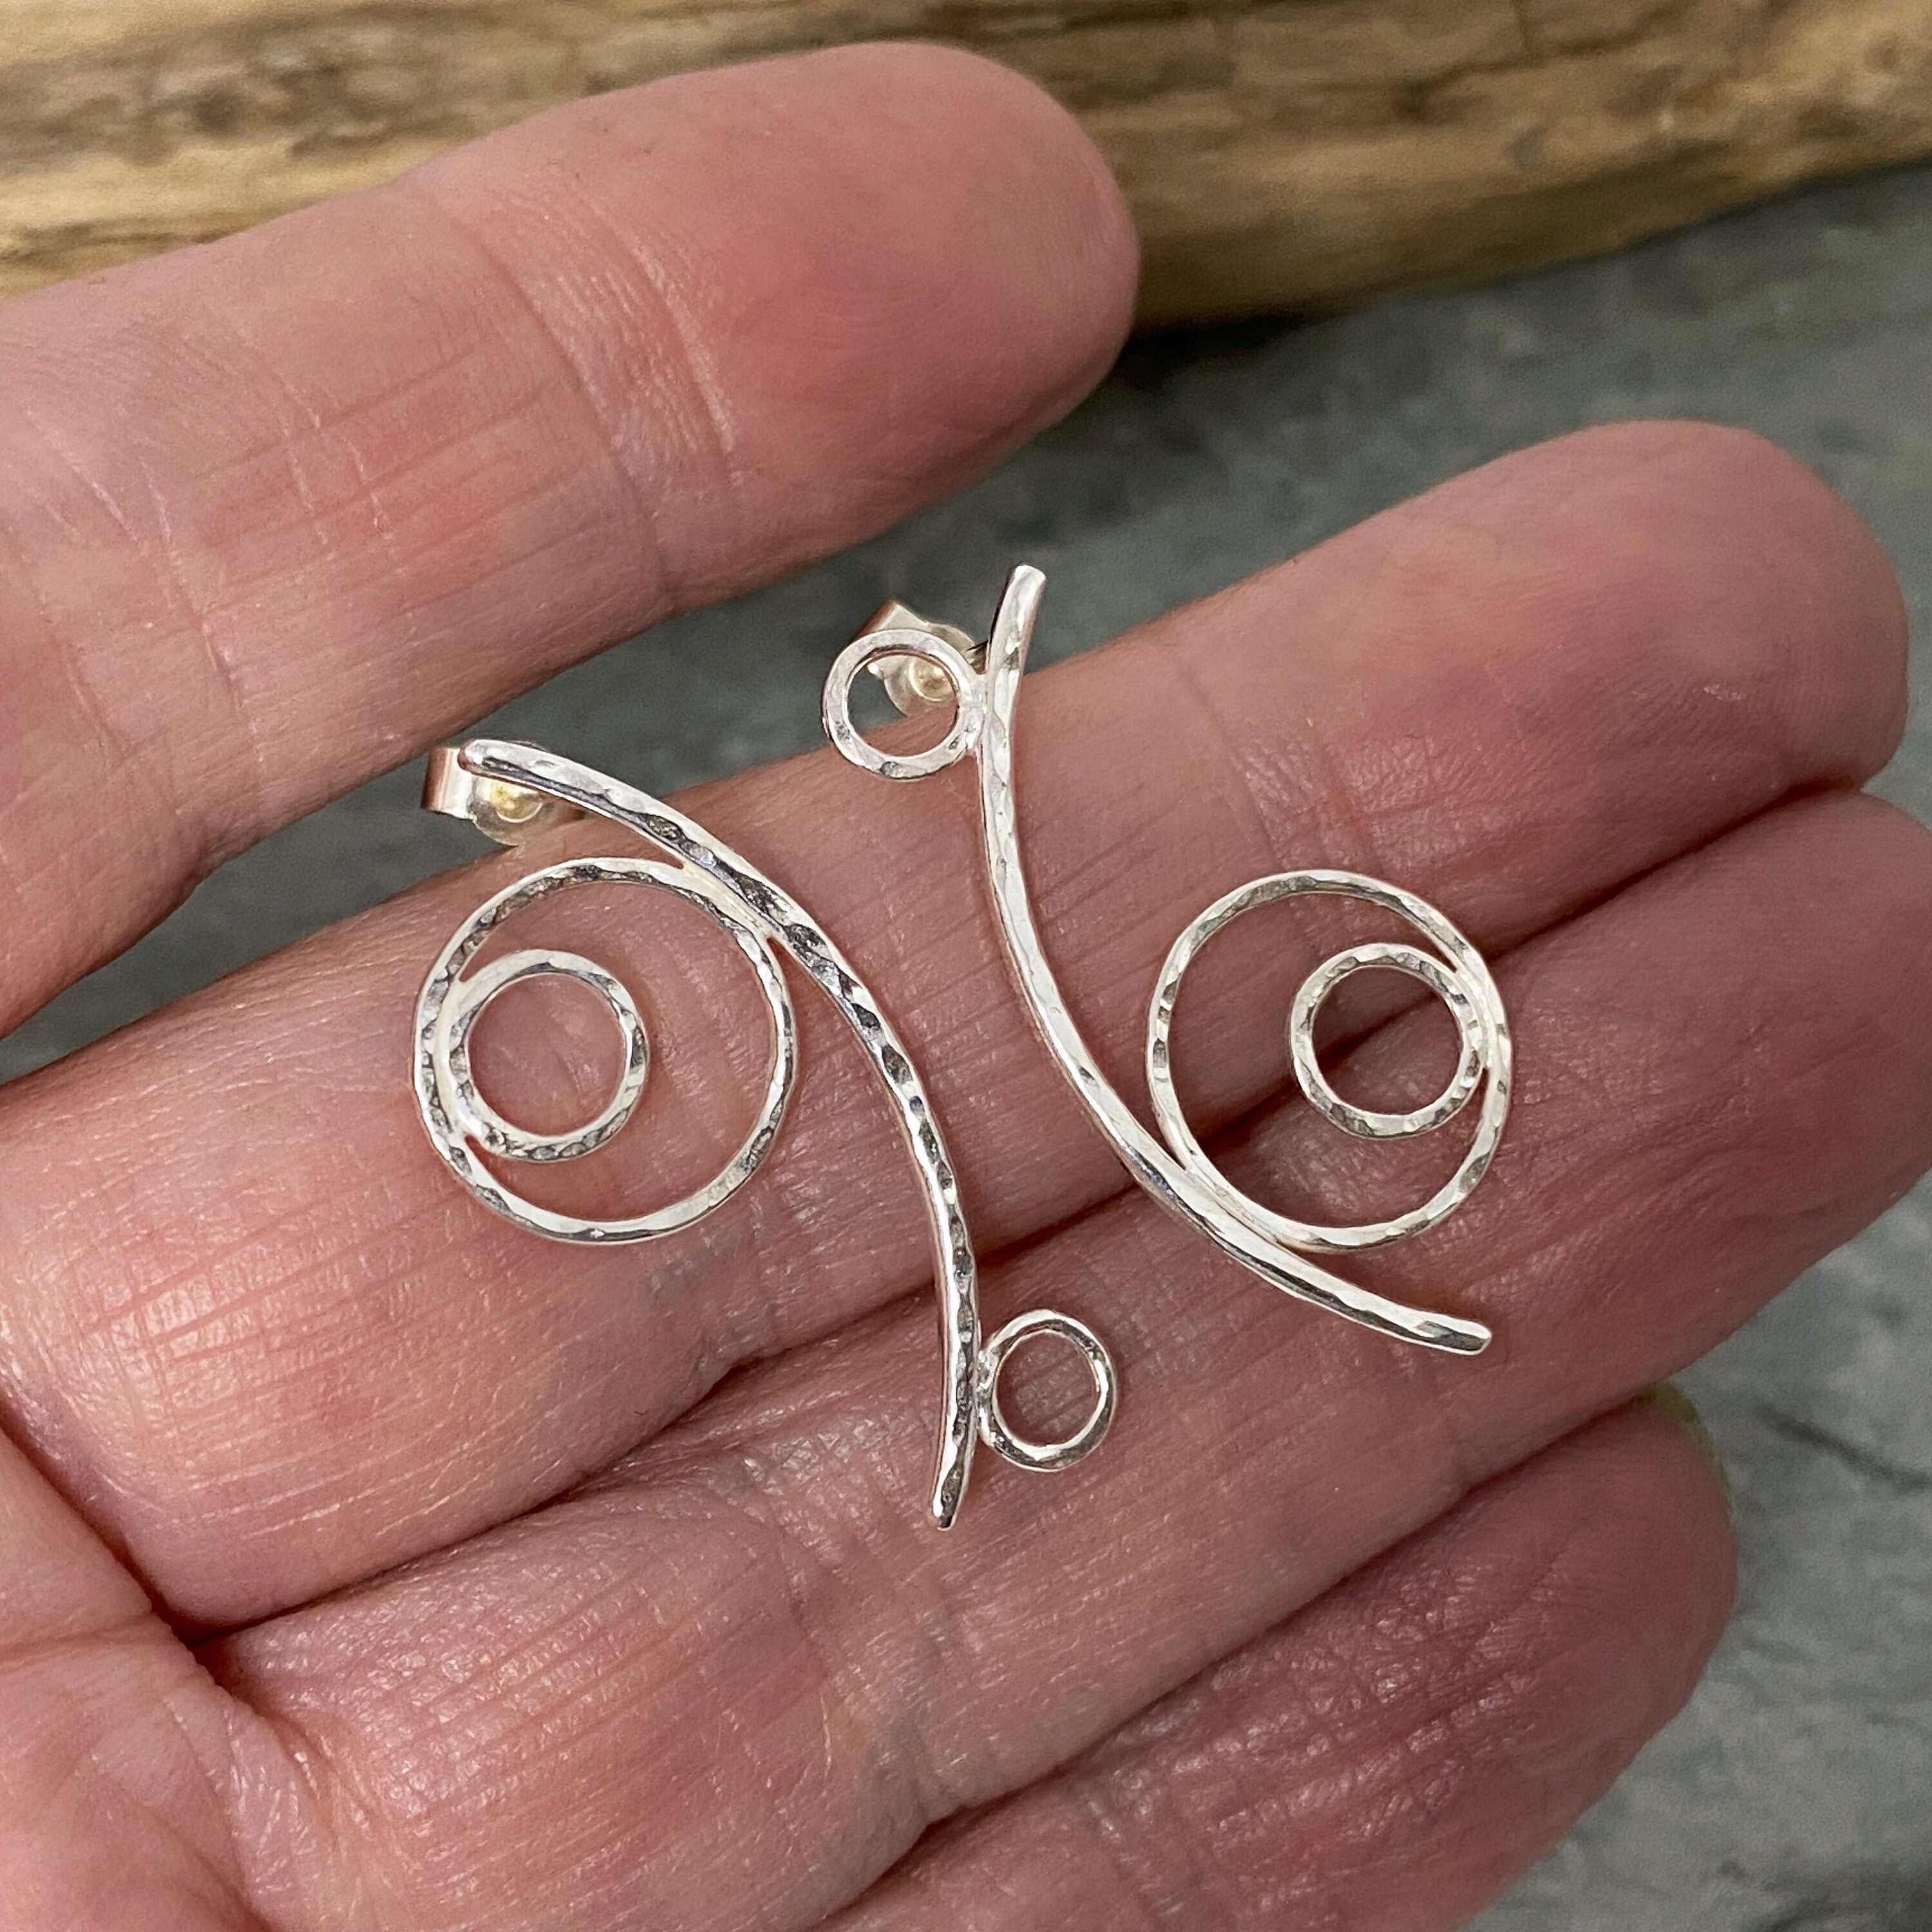 Asymmetrical Silver Earrings in A Yin Yang Design, Handmade From Recycled Sterling